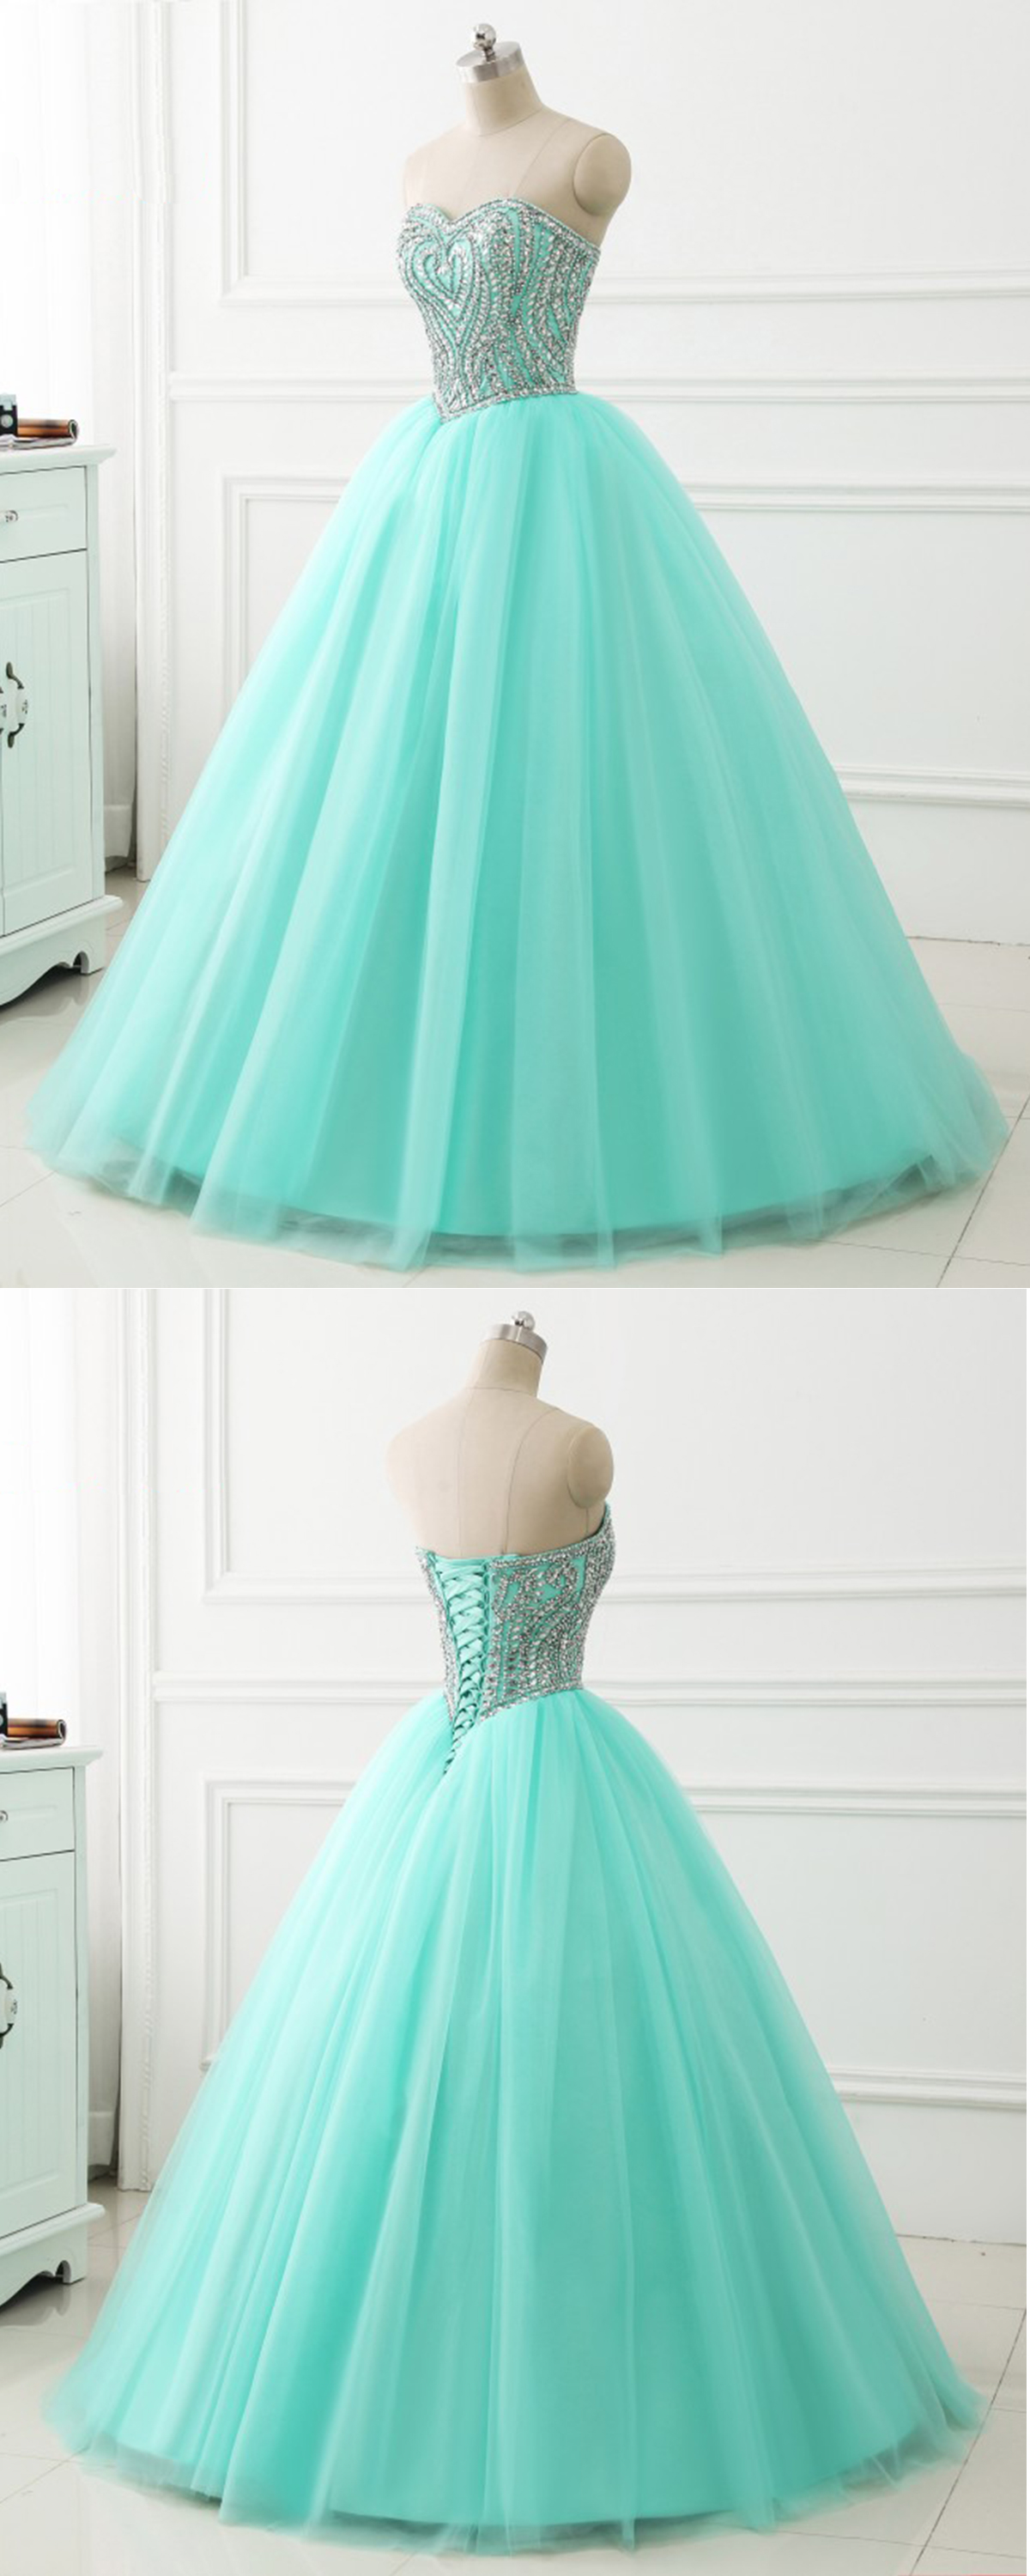 Sweetheart Neck Mint Tulle Beaded Long Ball Gown, Formal Prom Dress